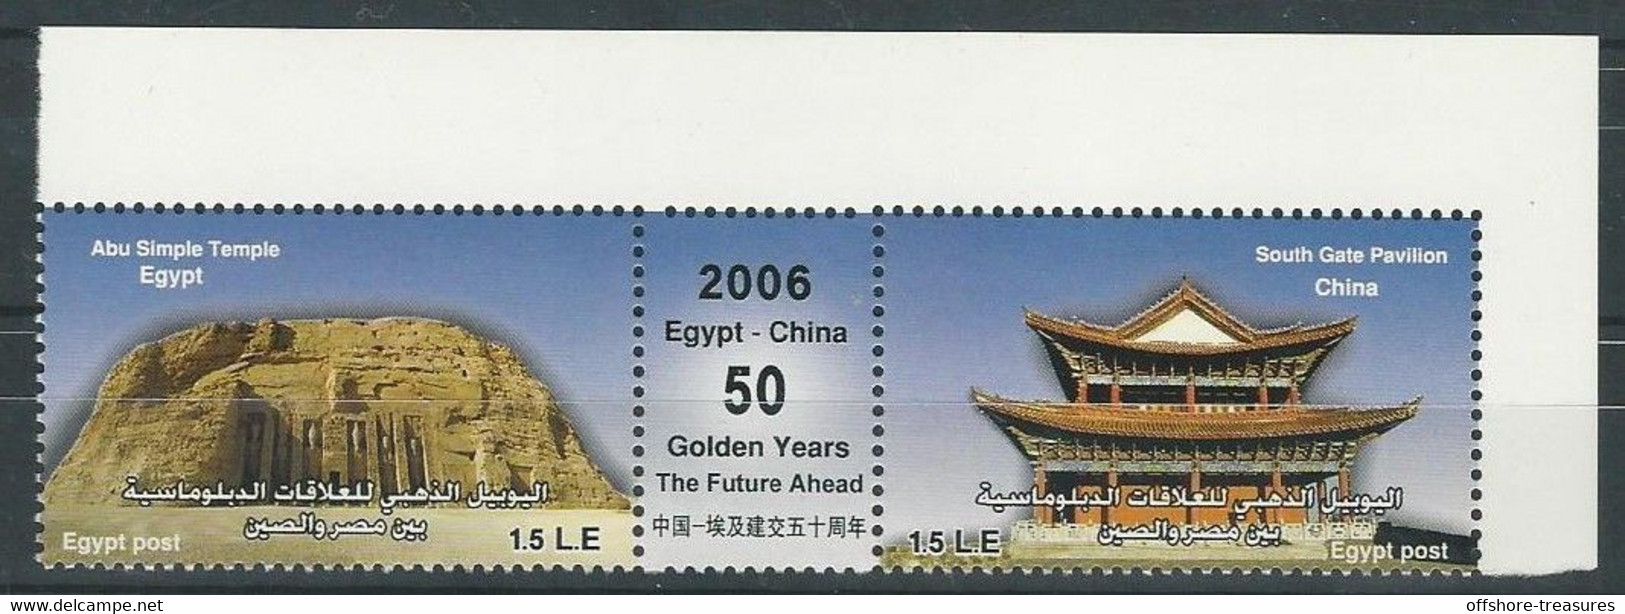 Egypt Stamp China 2006 Joint Issue - 50th Anniversary Of Egypt - China Diplomatic Relations - Margin Strip /Stamps - Ungebraucht